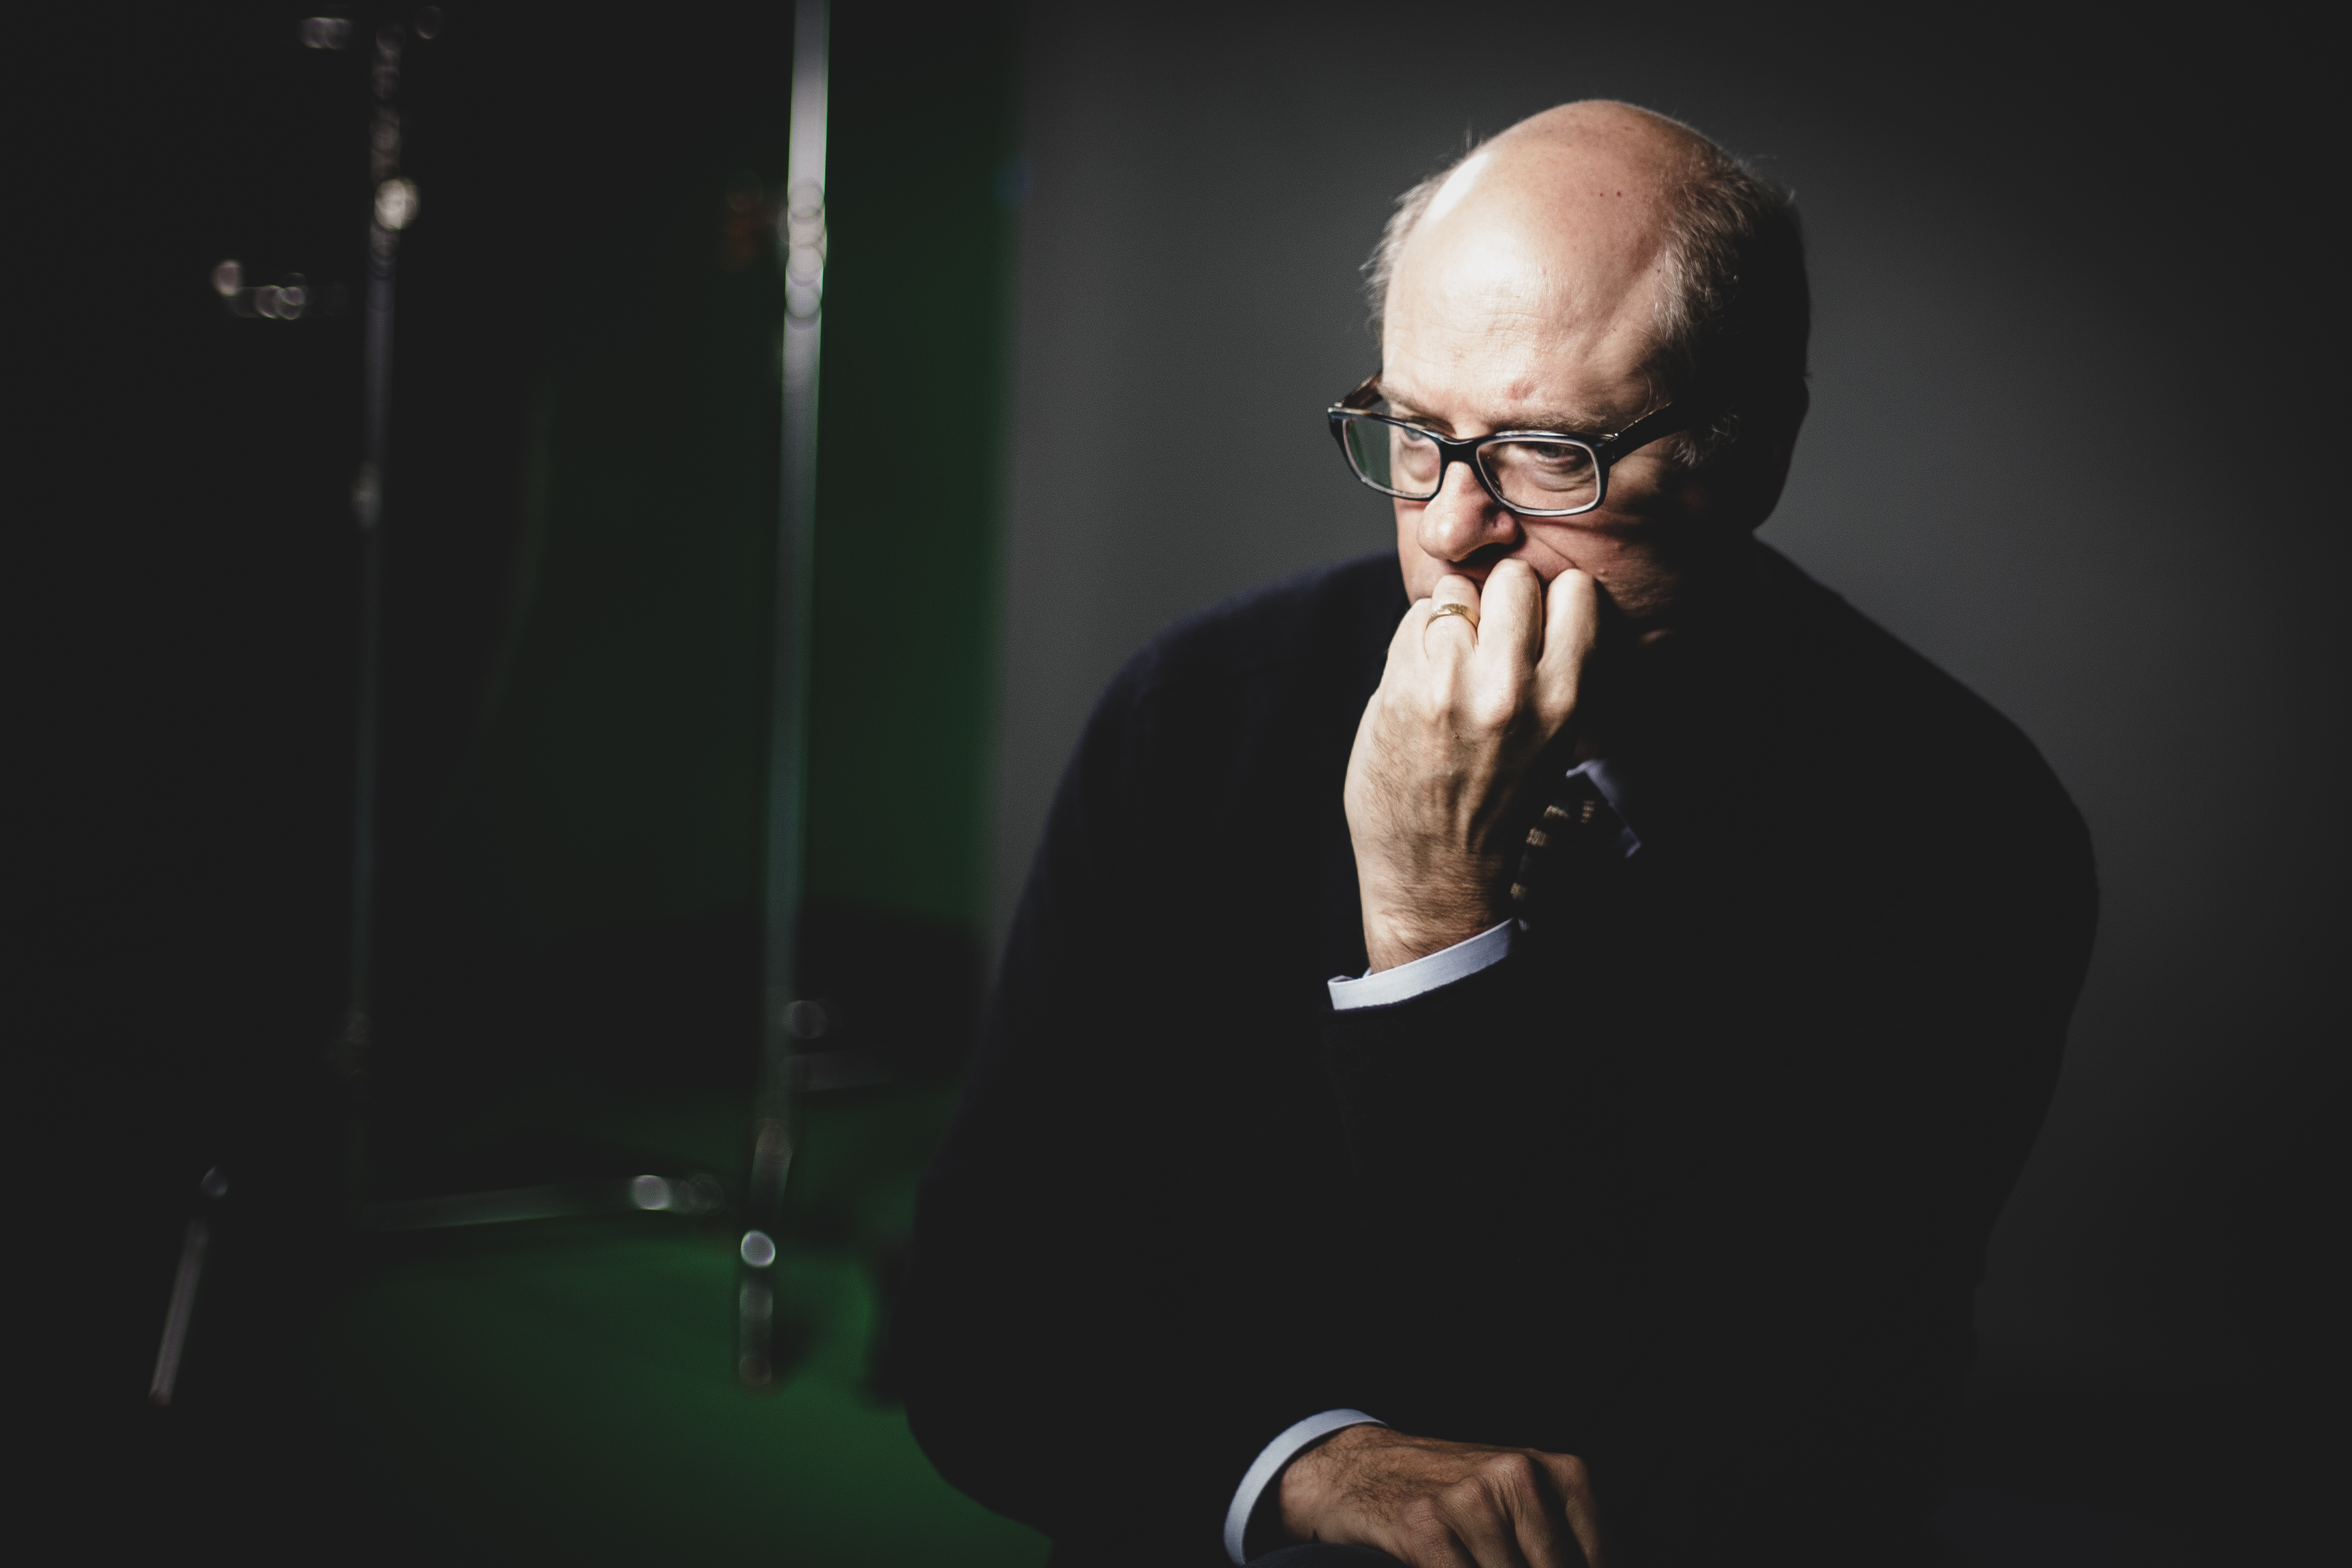 Tobolowsky in a pensive backstage moment. Courtesy of David Chen